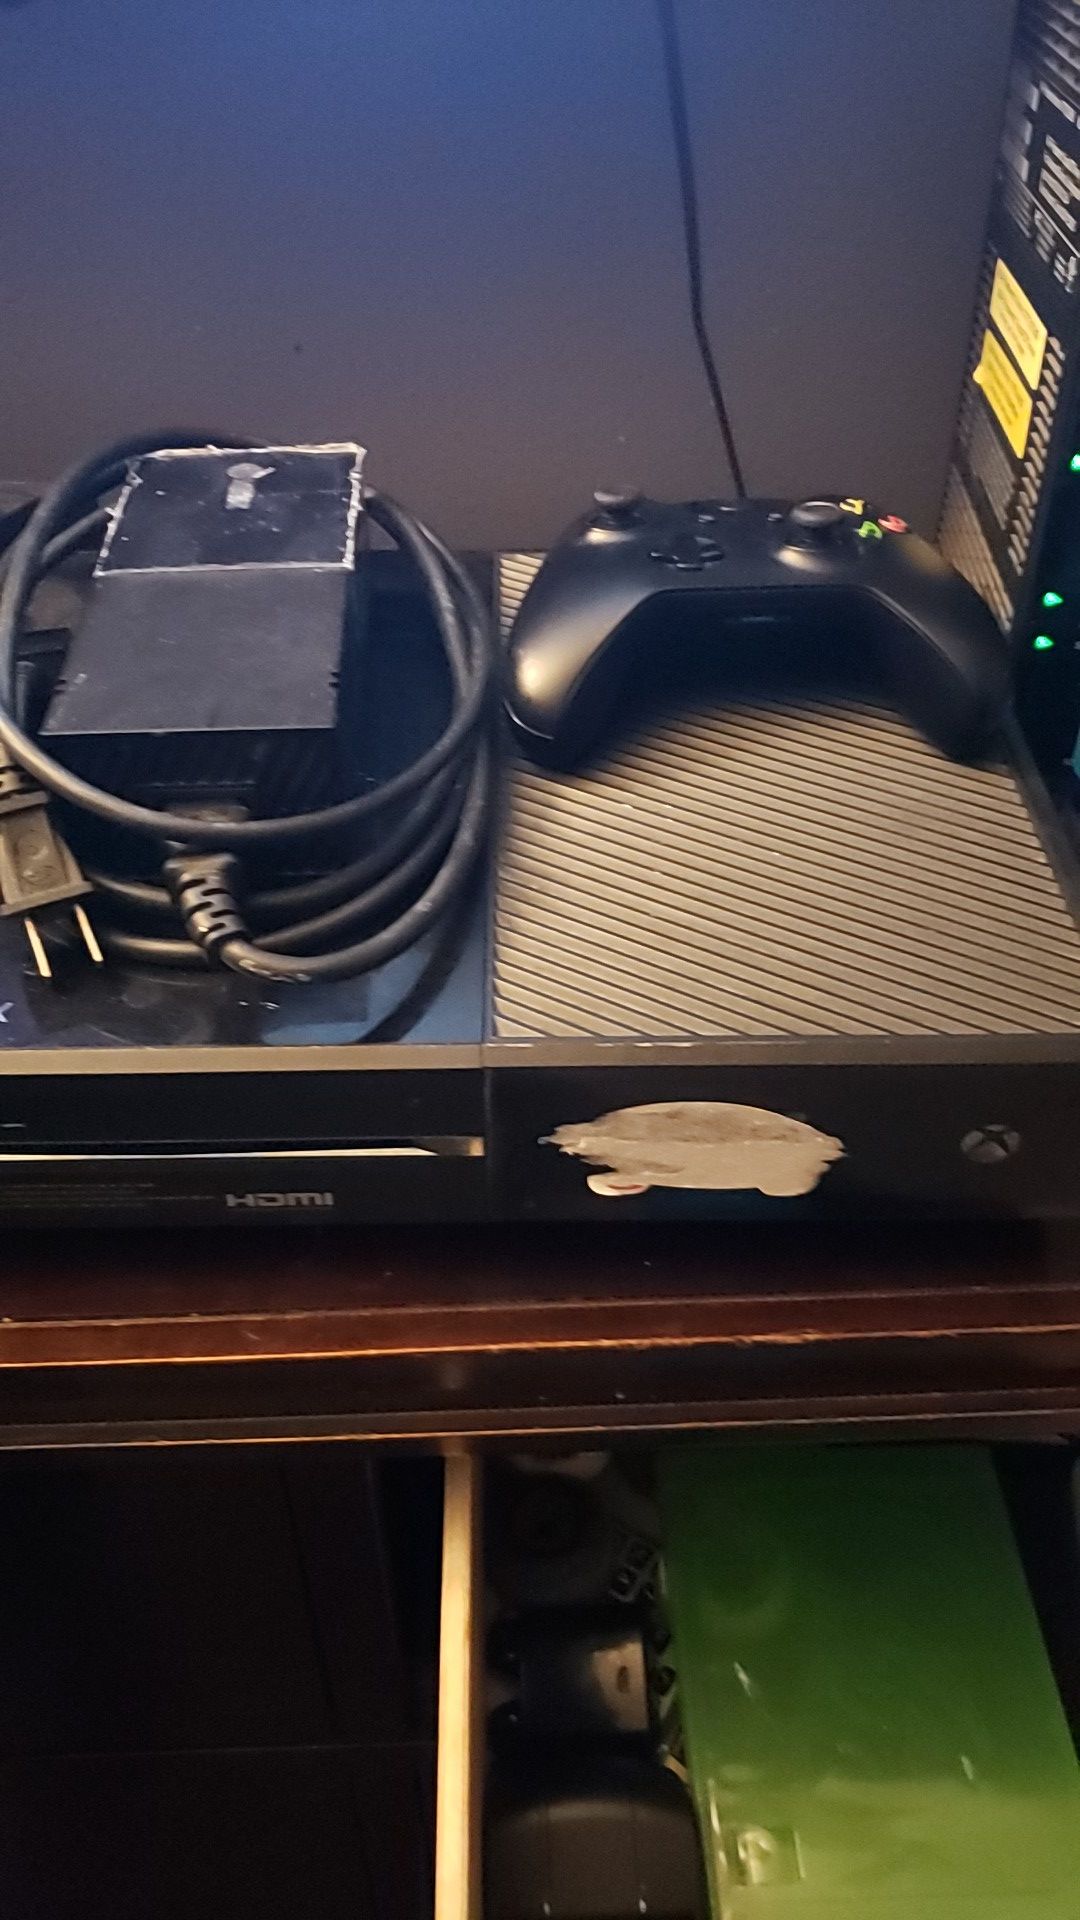 Xbox one in good condition and one wireless controller